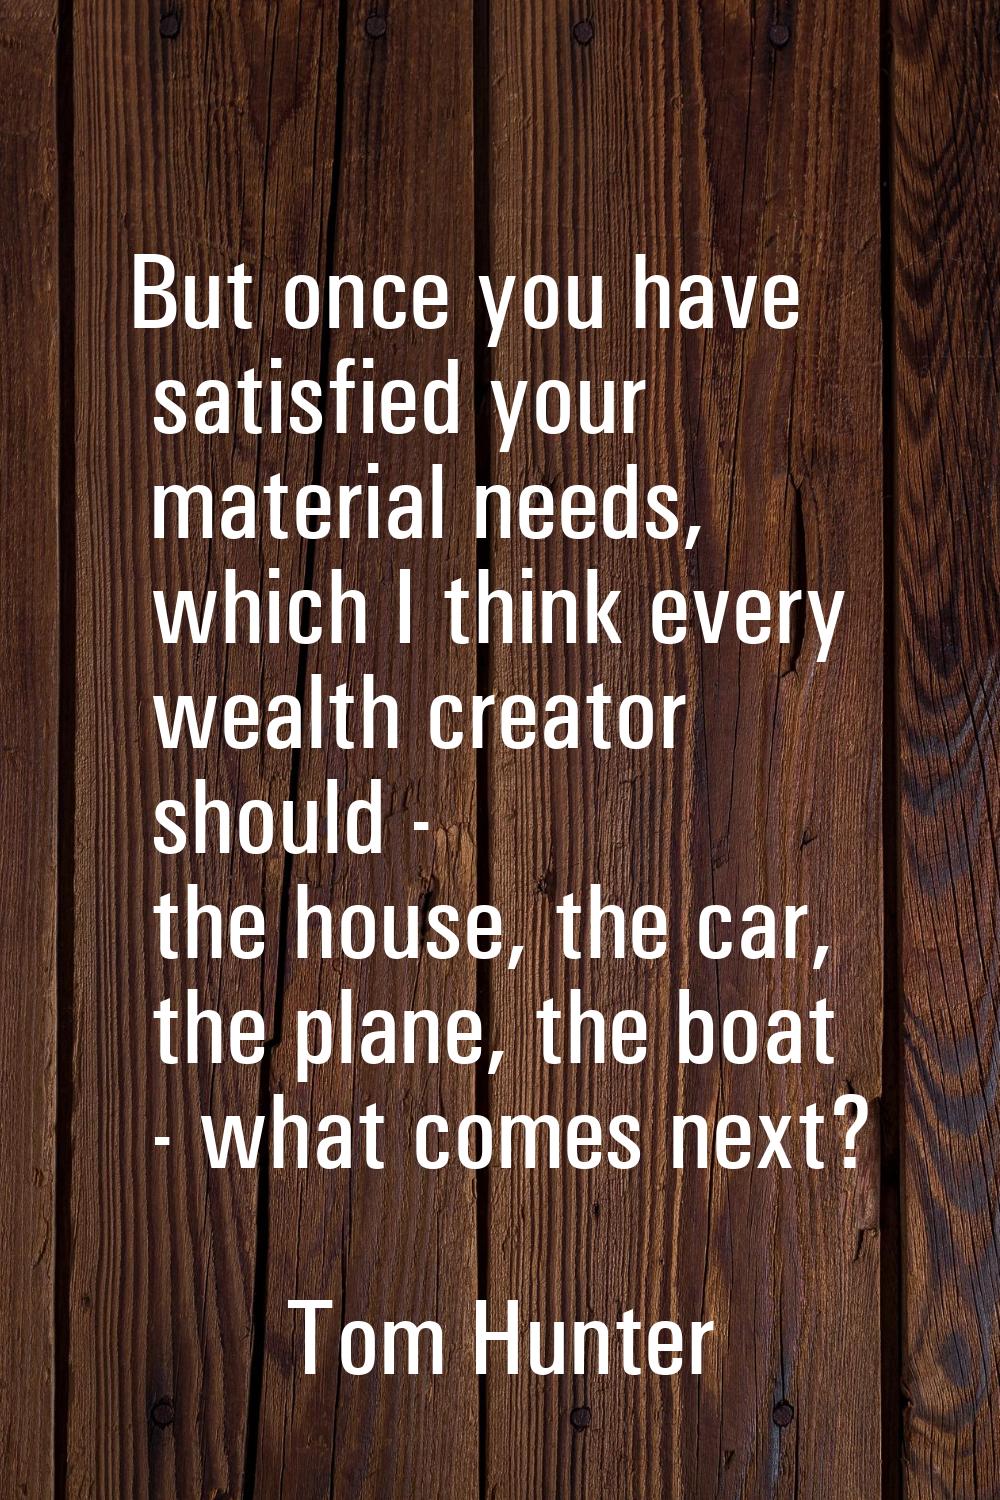 But once you have satisfied your material needs, which I think every wealth creator should - the ho